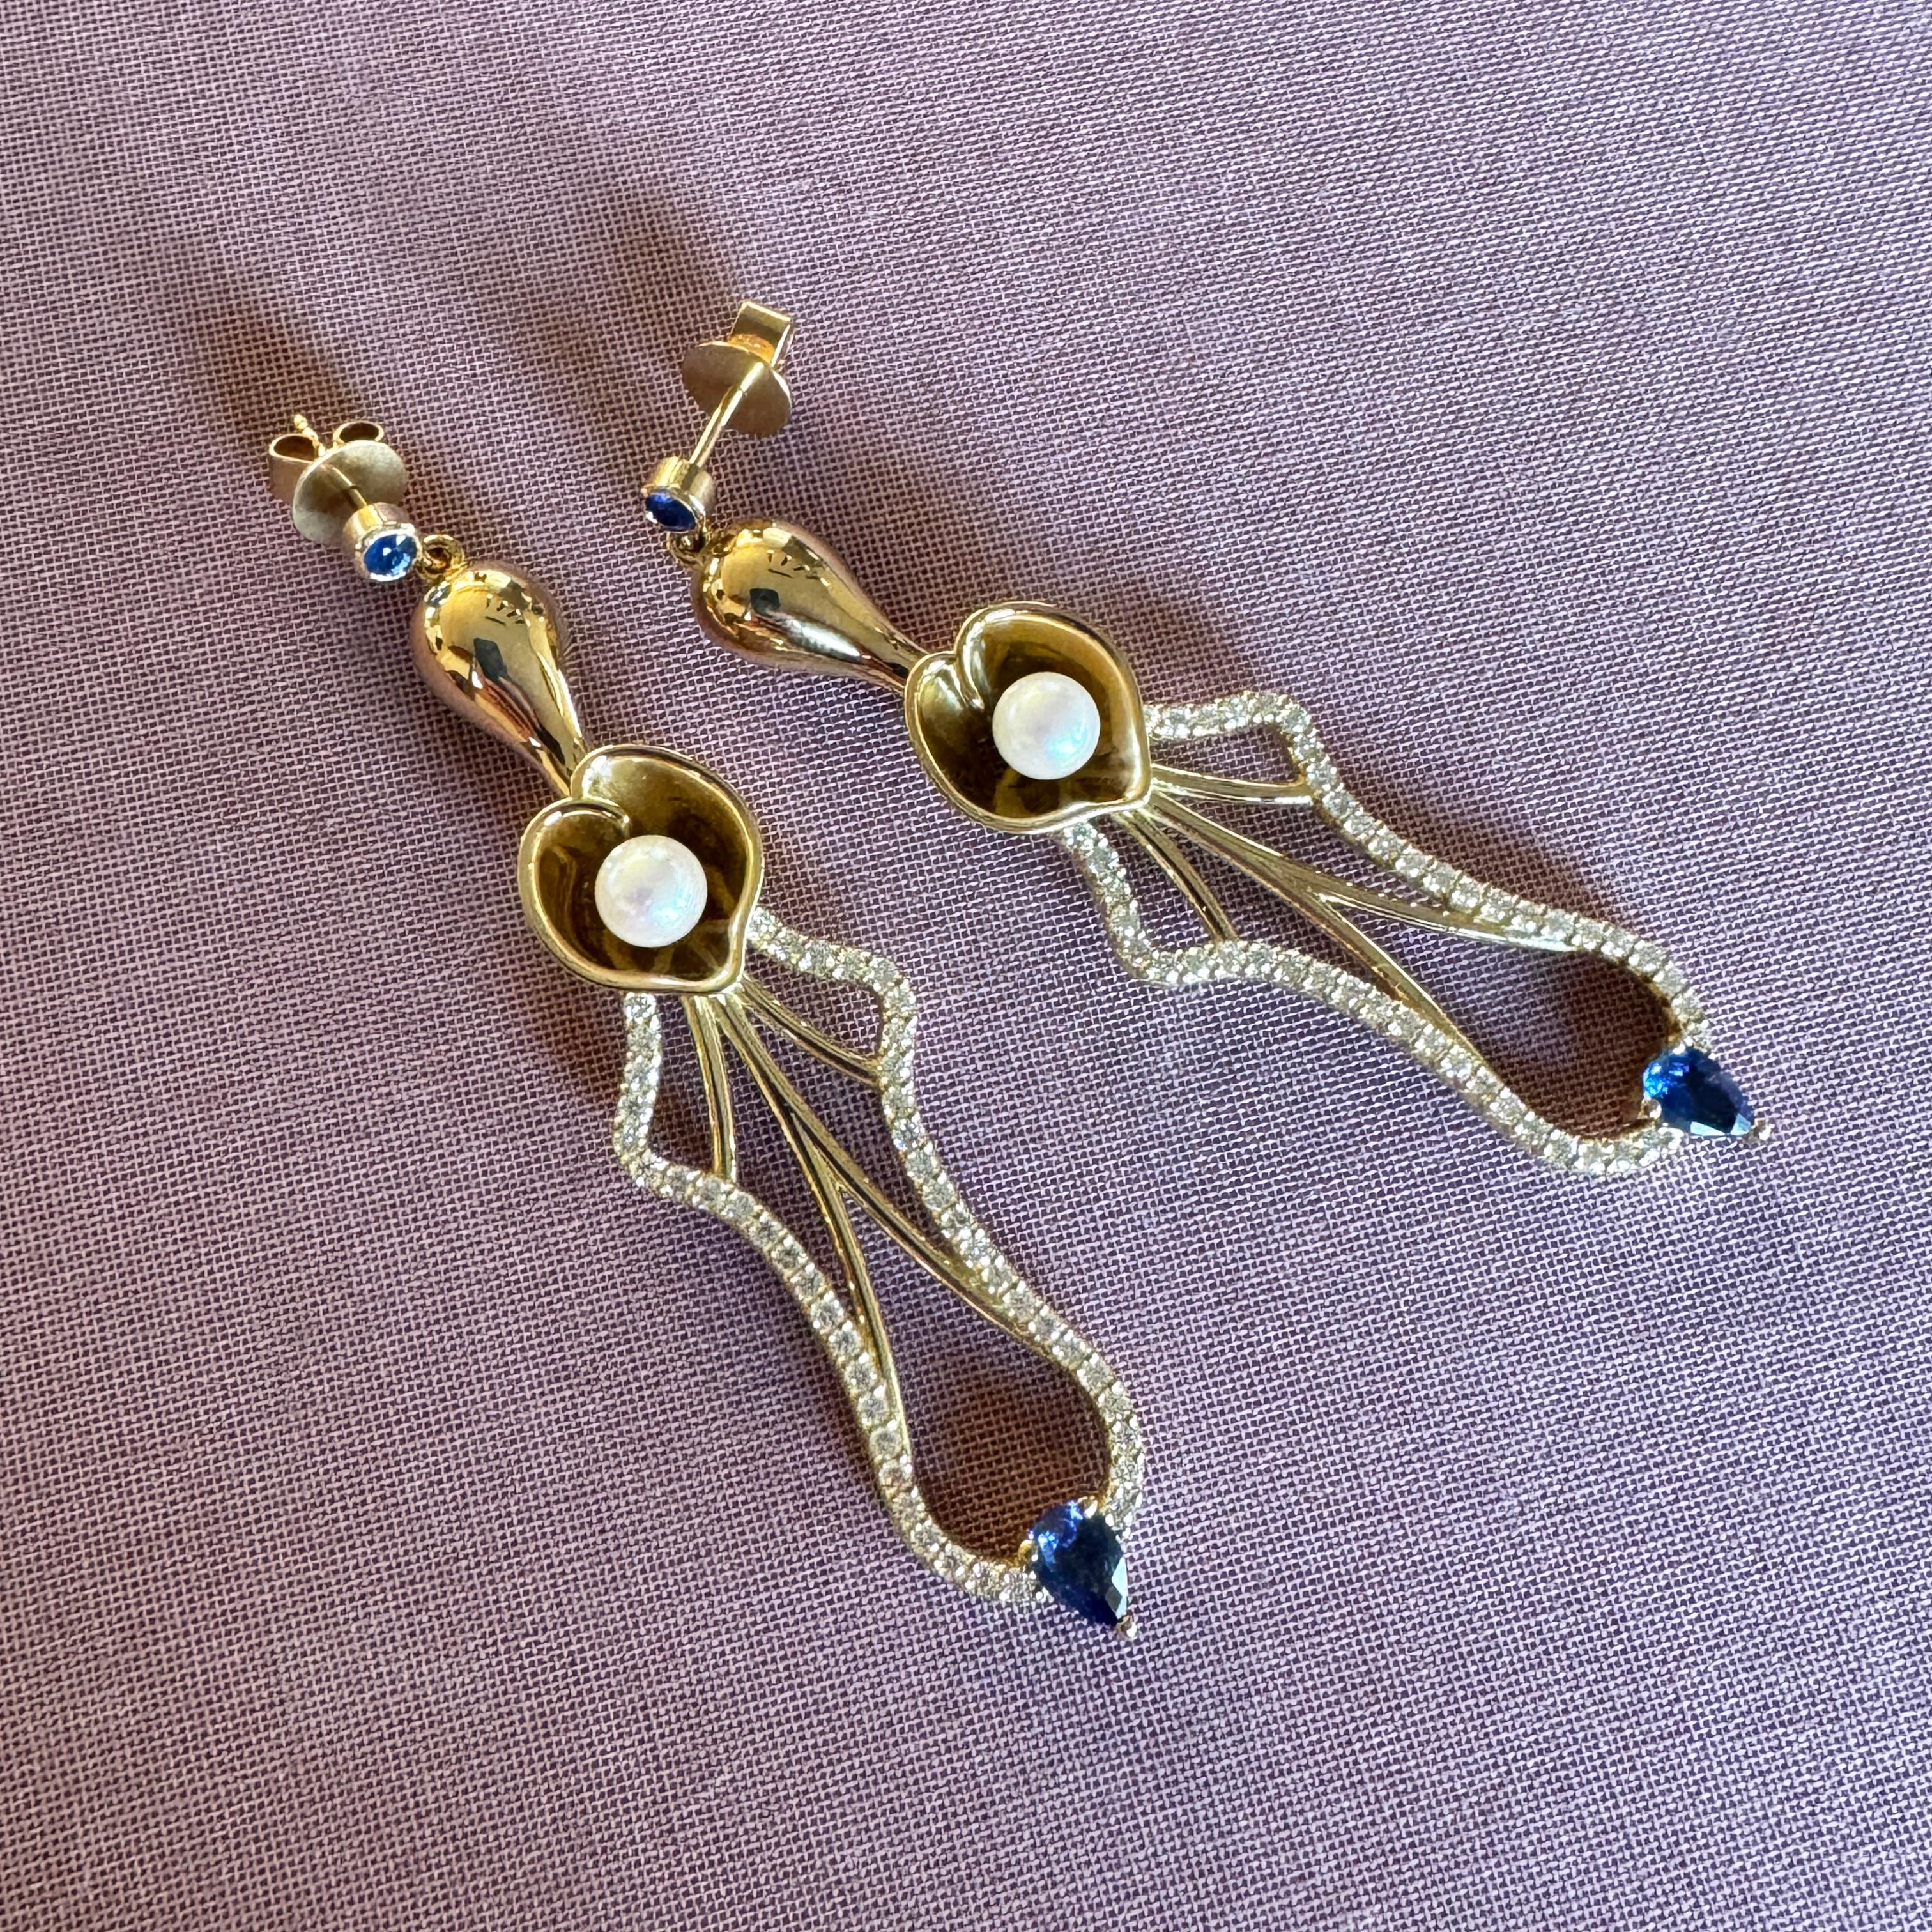 Contemporary Lilies Earrings in 18 Karat Yellow Gold with Diamonds, Sapphires And Pearls